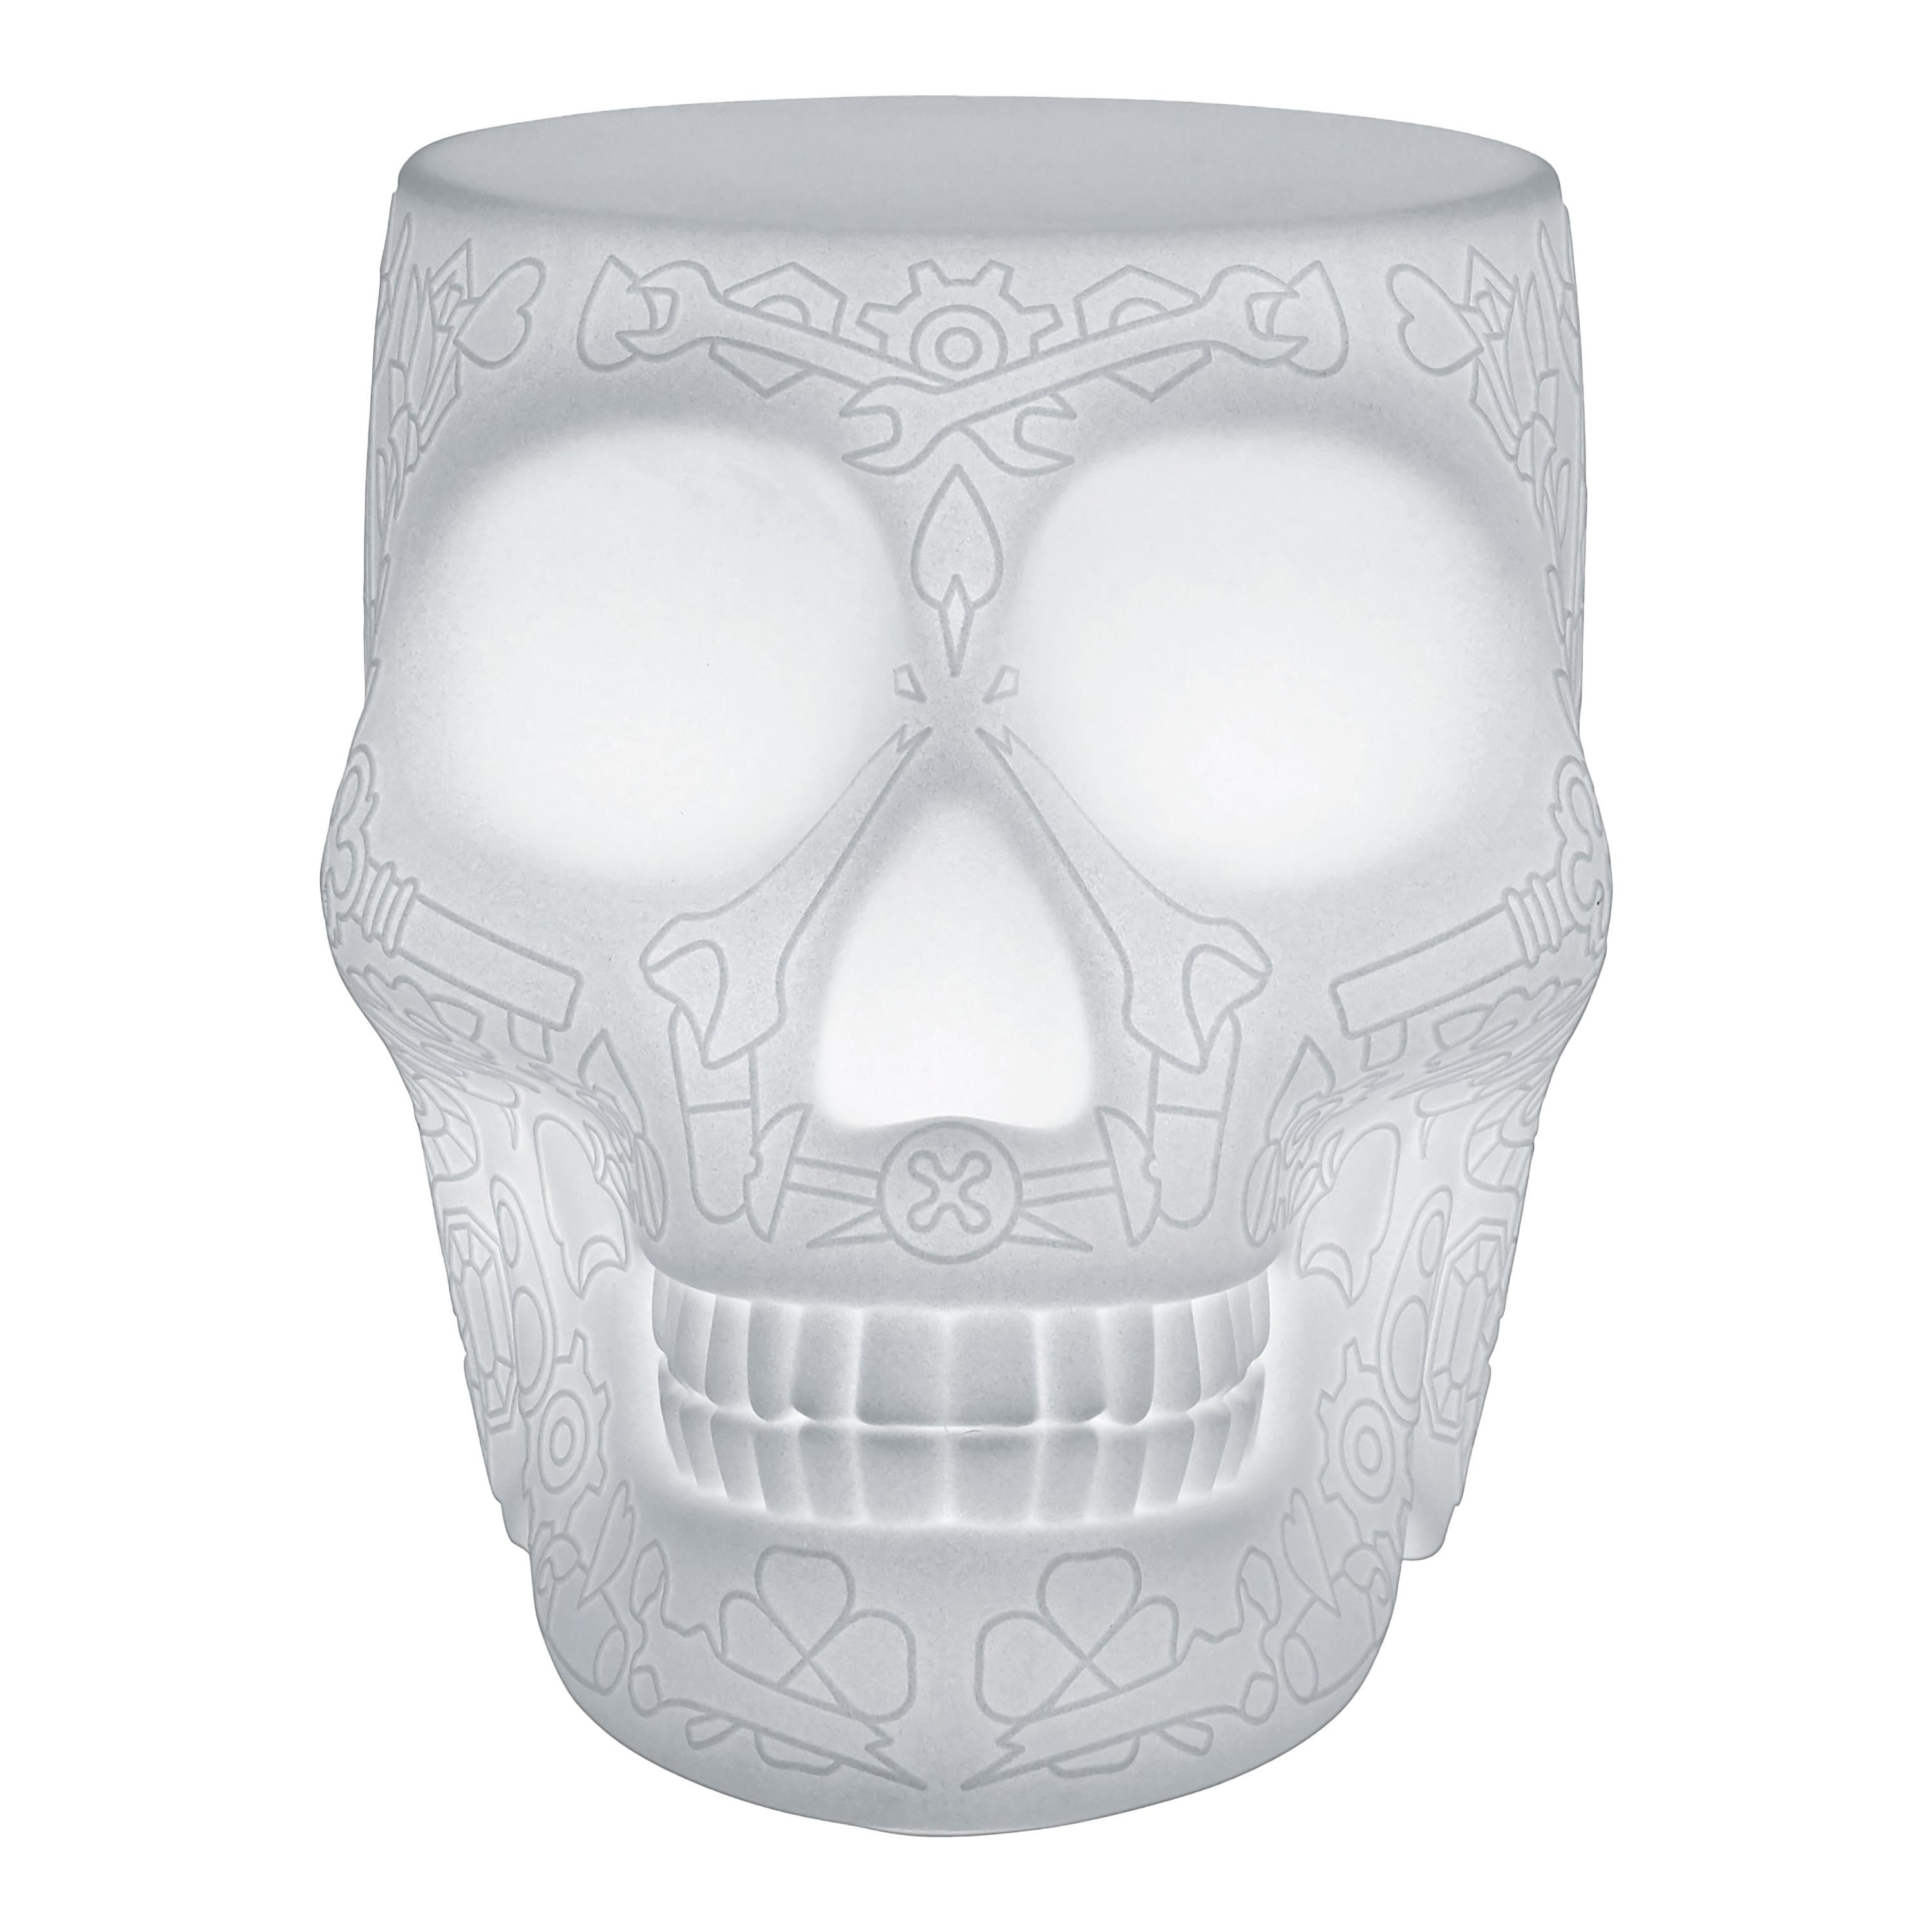 Modern White Mexican Calavera Skull Stool or Side Table By Studio Job